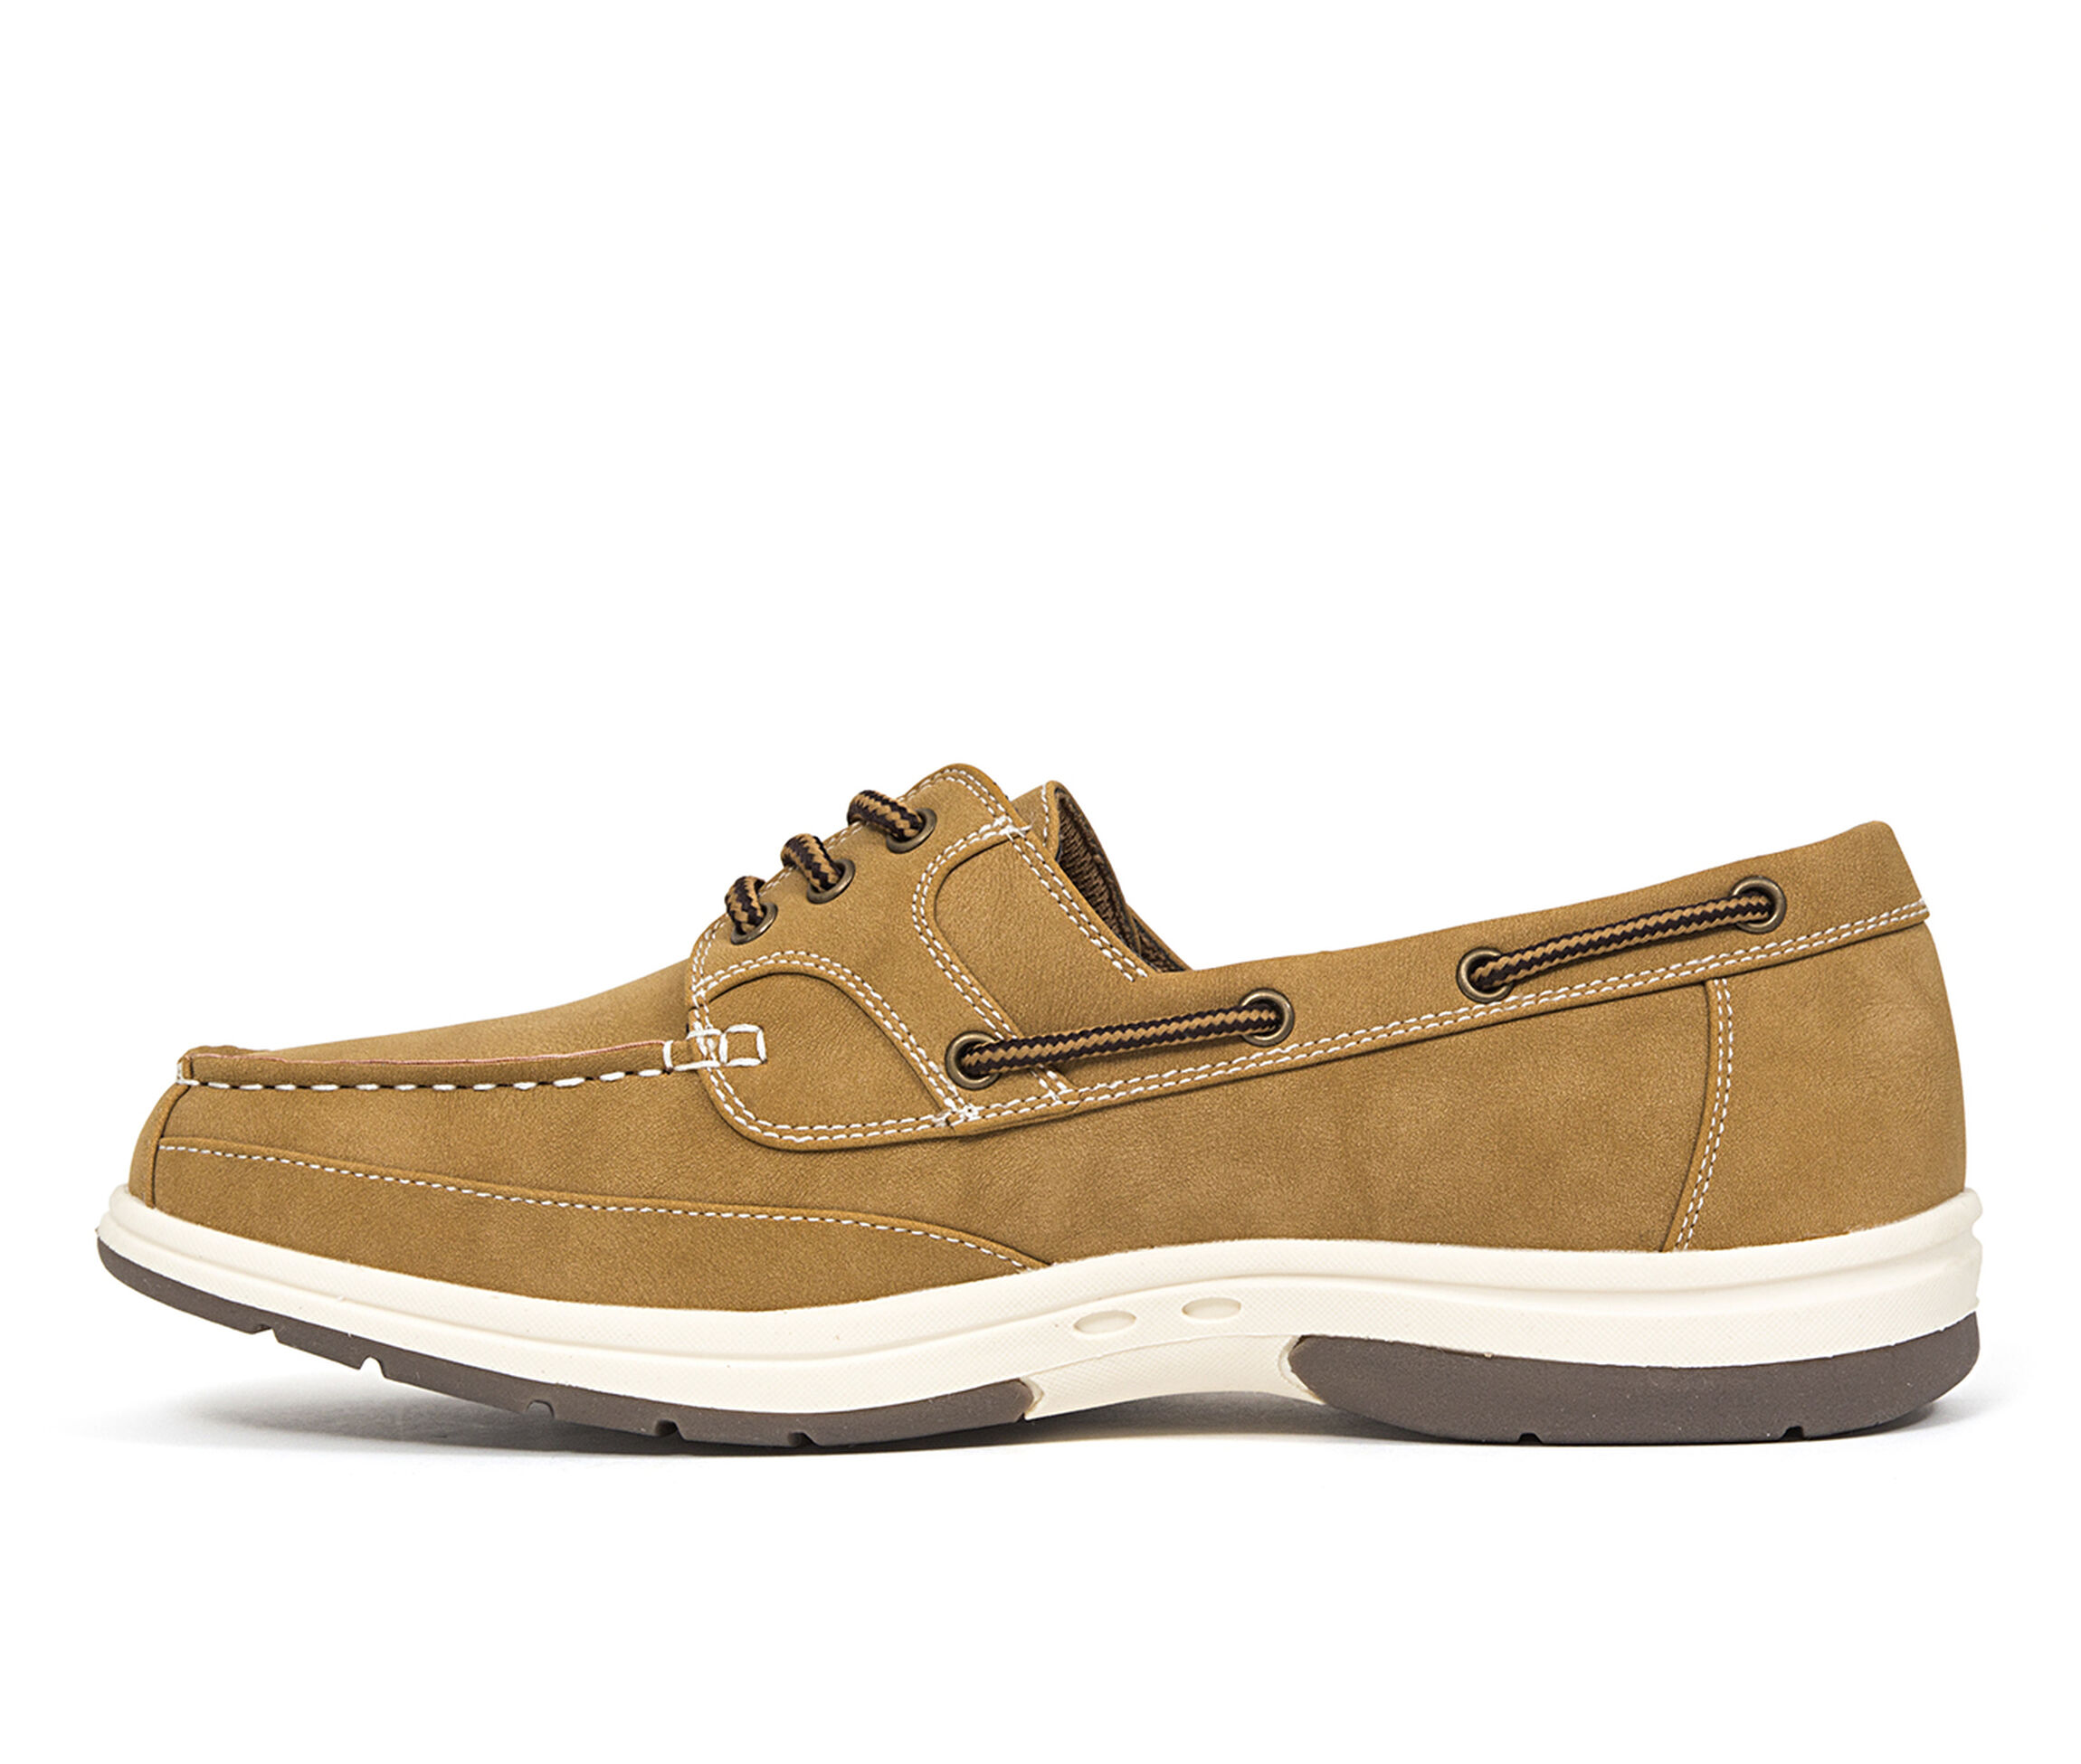 Men's Deer Stags Mitch Boat Shoes in Light Tan Size 9 Medium